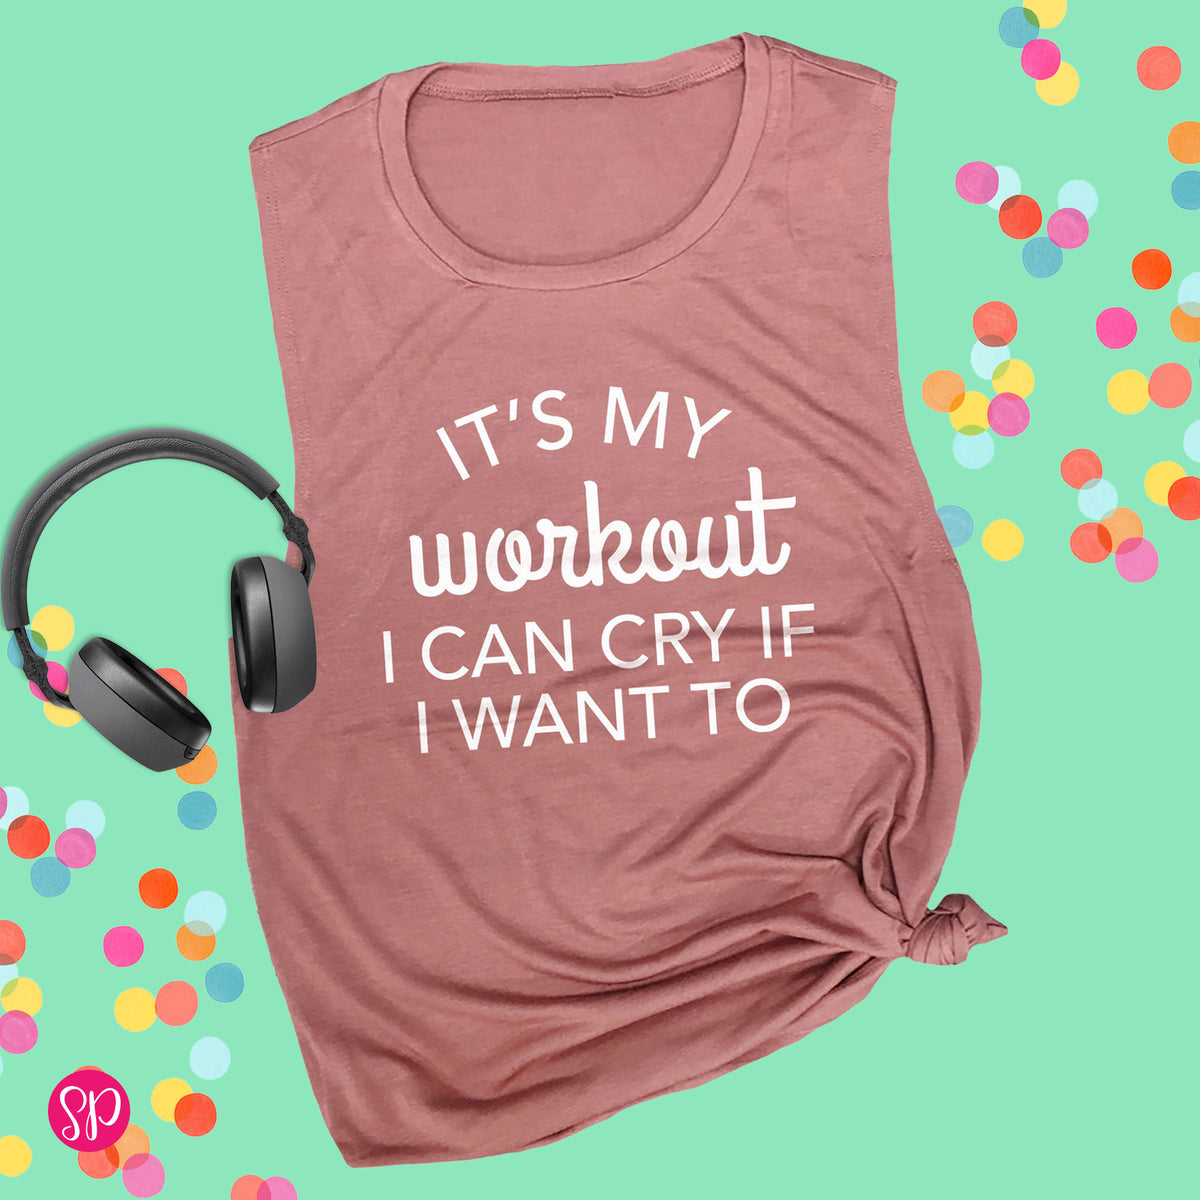 It's My Workout I Can Cry If I Want To Funny Fitness Exercise Journey Tank Top Women